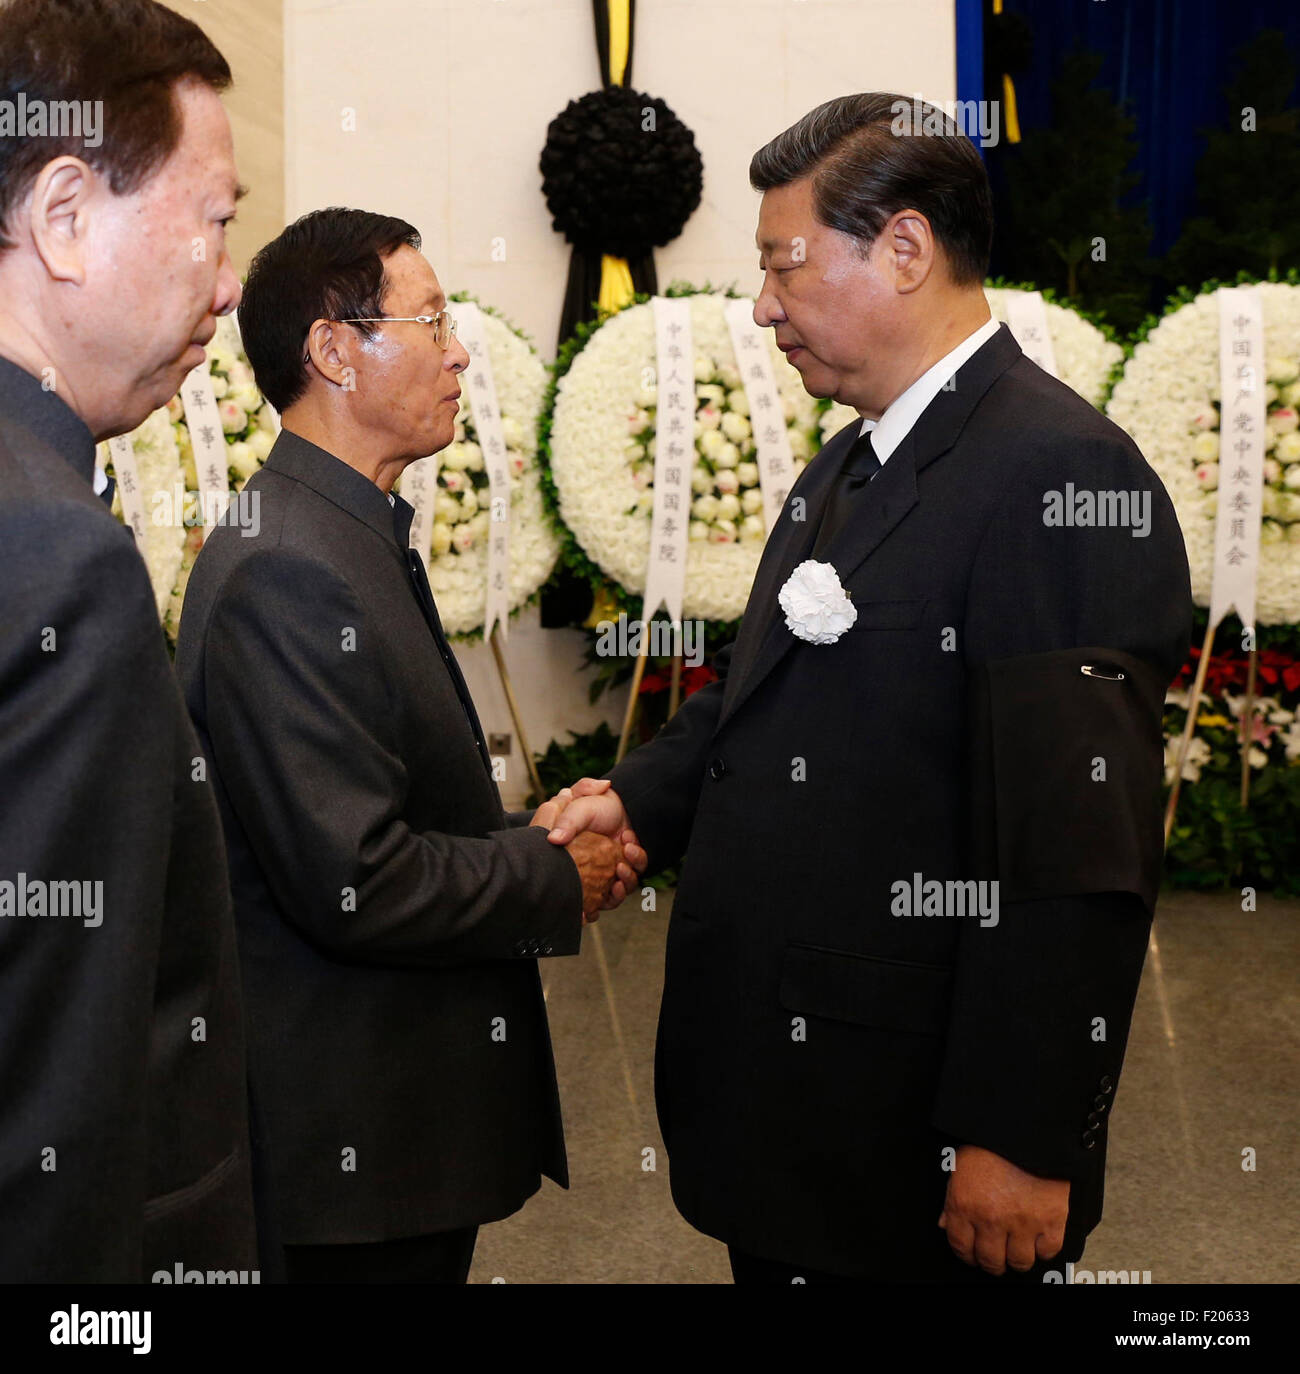 (150909) -- BEIJING, Sept. 9, 2015 (Xinhua) -- Chinese President Xi Jinping (R, front) shakes hands with a family member of Zhang Zhen, former vice chairman of China's Central Military Commission, during Zhang's funeral at the Babaoshan Revolutionary Cemetery in Beijing, capital of China, Sept. 9, 2015. The body of Zhang Zhen was cremated Wednesday in Beijing.  (Xinhua/Ju Peng)(yxb) Stock Photo